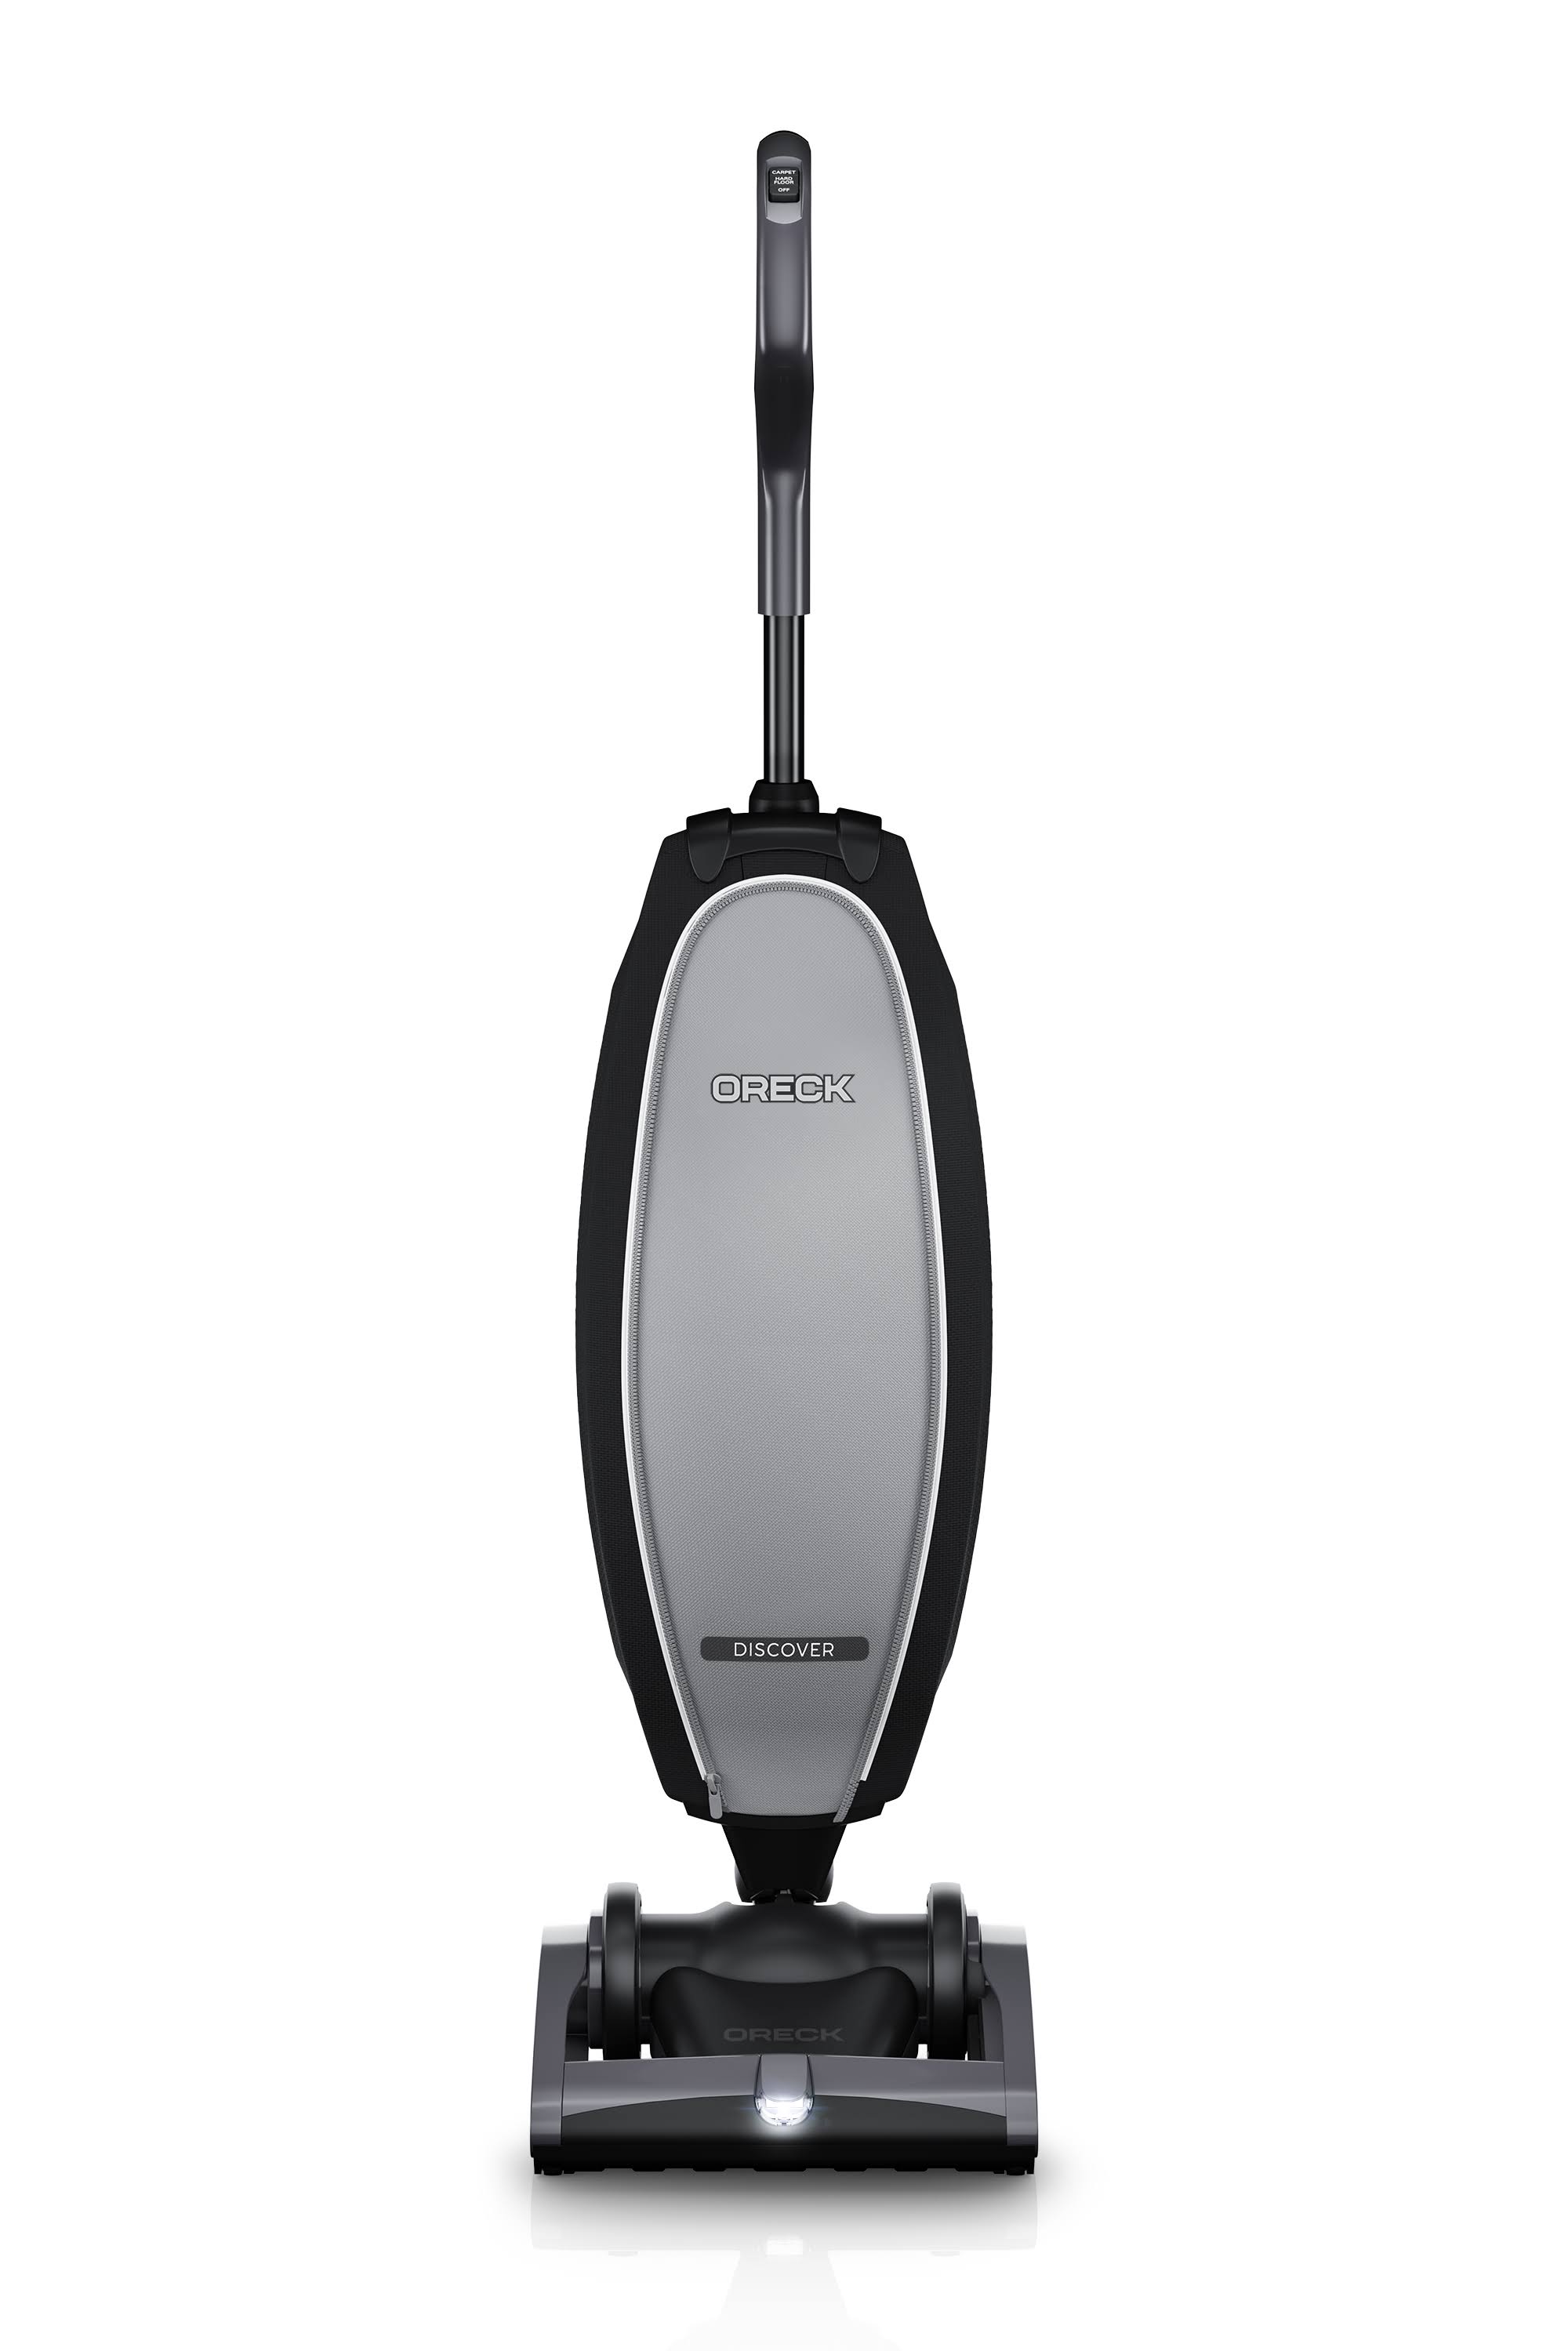 Oreck Discover Bagged Upright Vacuum Cleaner - UK30500